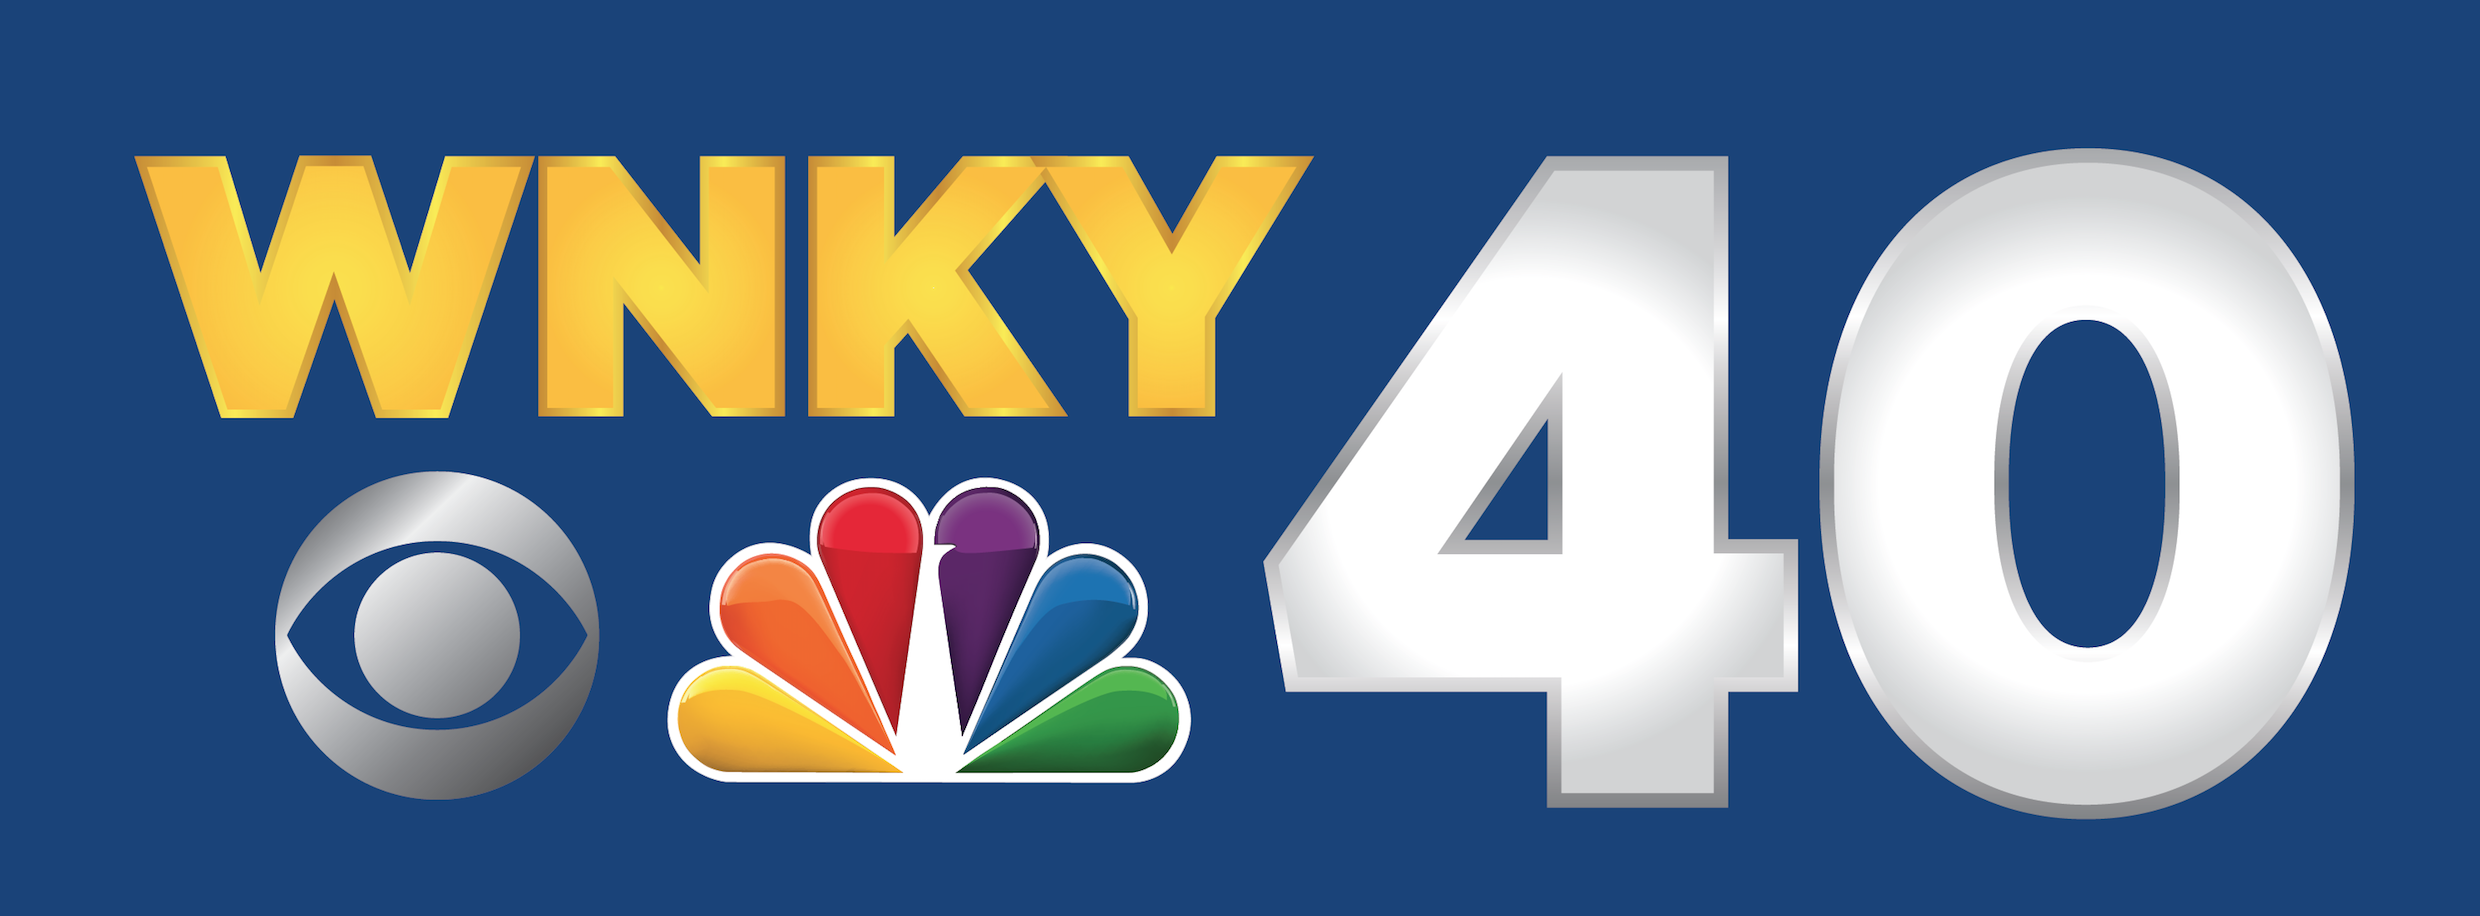 NBC announces 2020 Sunday Night Football schedule - WNKY News 40 Television